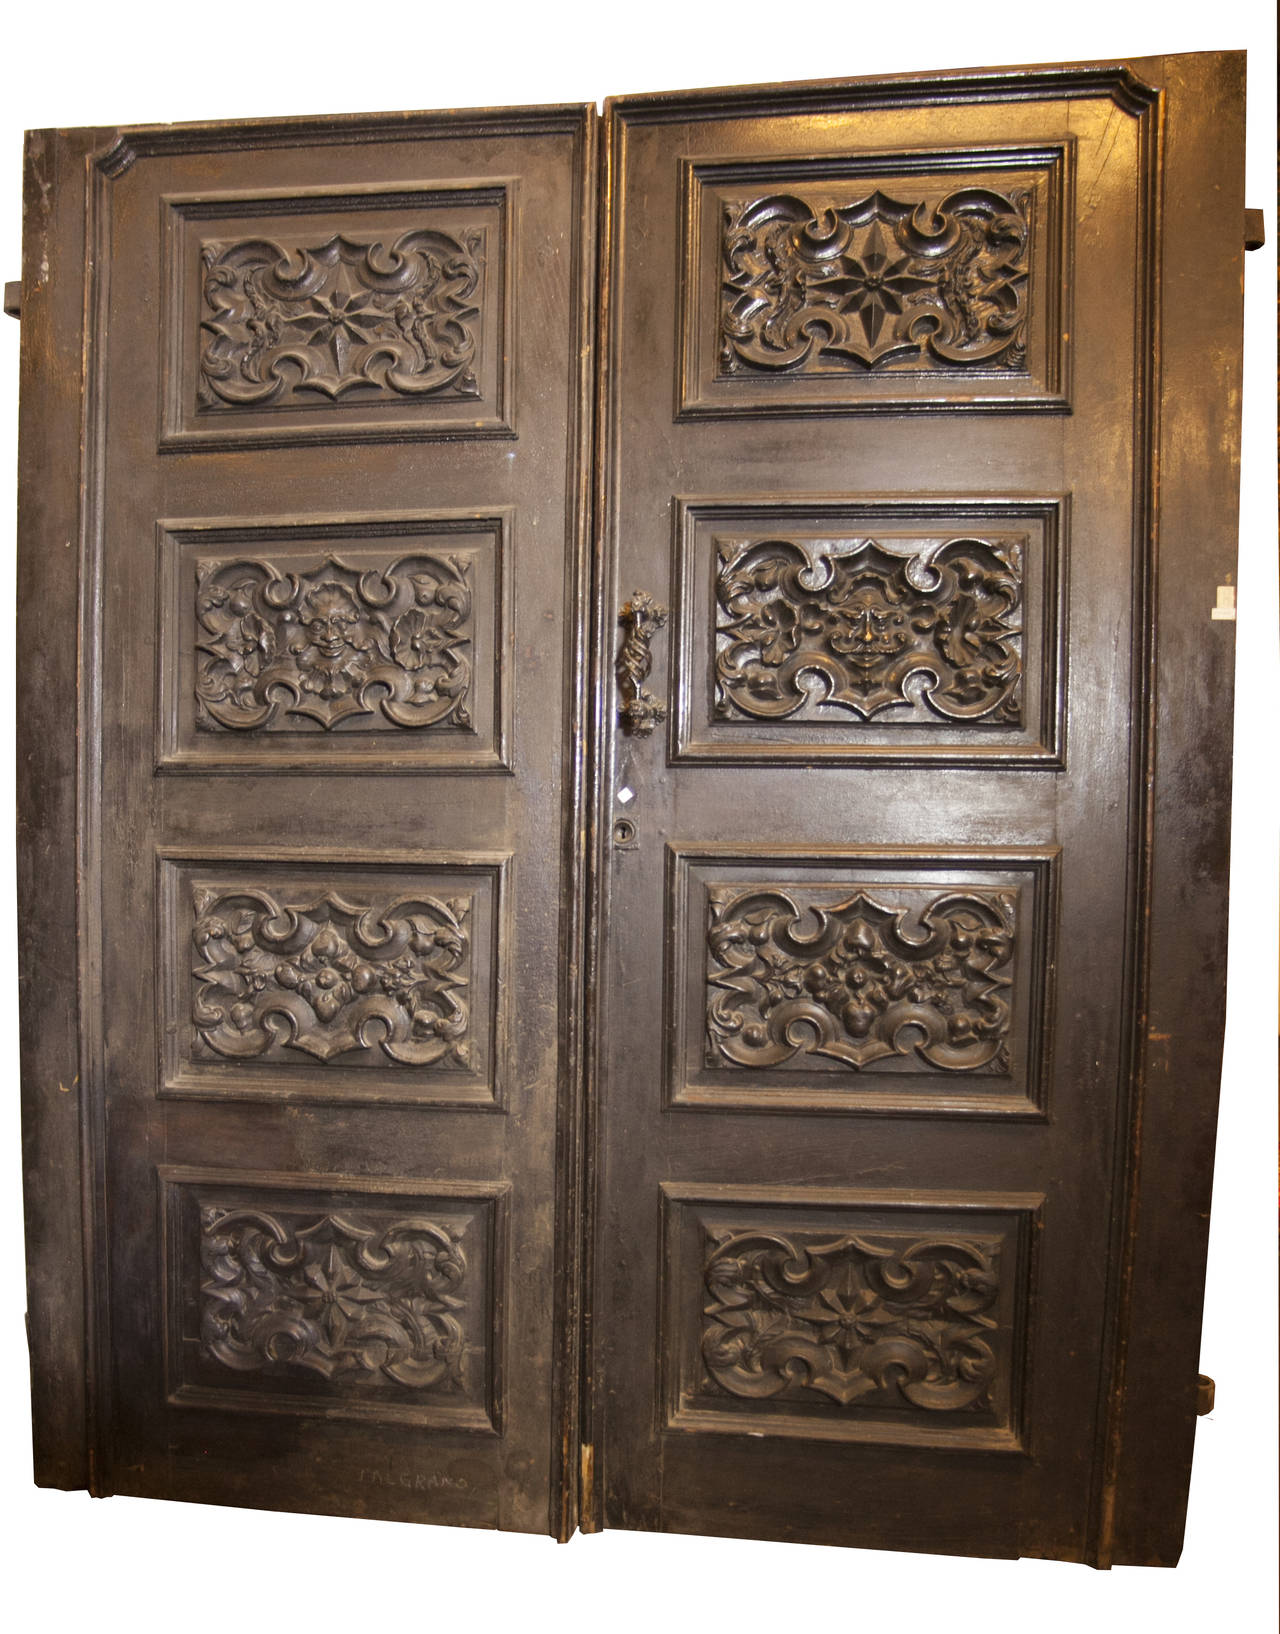 Antique Doorway made of oak and walnut
Comes from Piemonte ( North of Italy)
Ancient and majestic sixteenth-century walnut door with masks carved by hand in dark black walnut wood.
north Italy origin, size h 245 x205 maximum width with 12 cm side